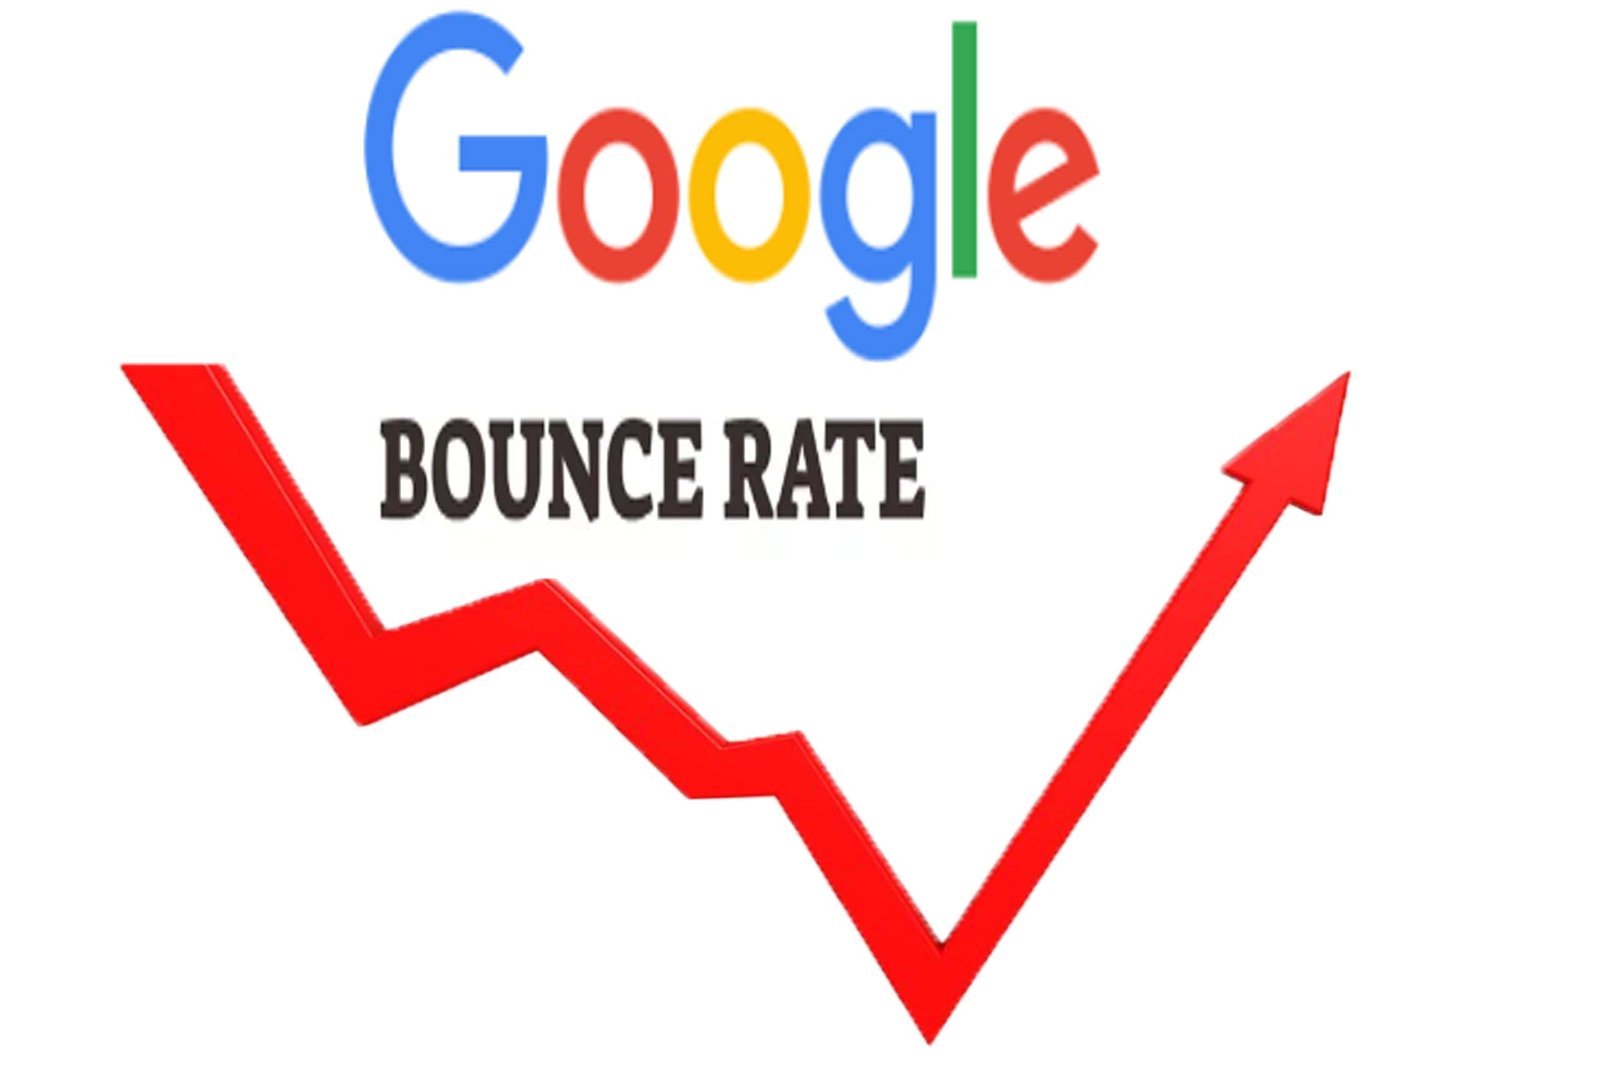 Is There A Relationship Between Bounce Rate & SERP Rankings?